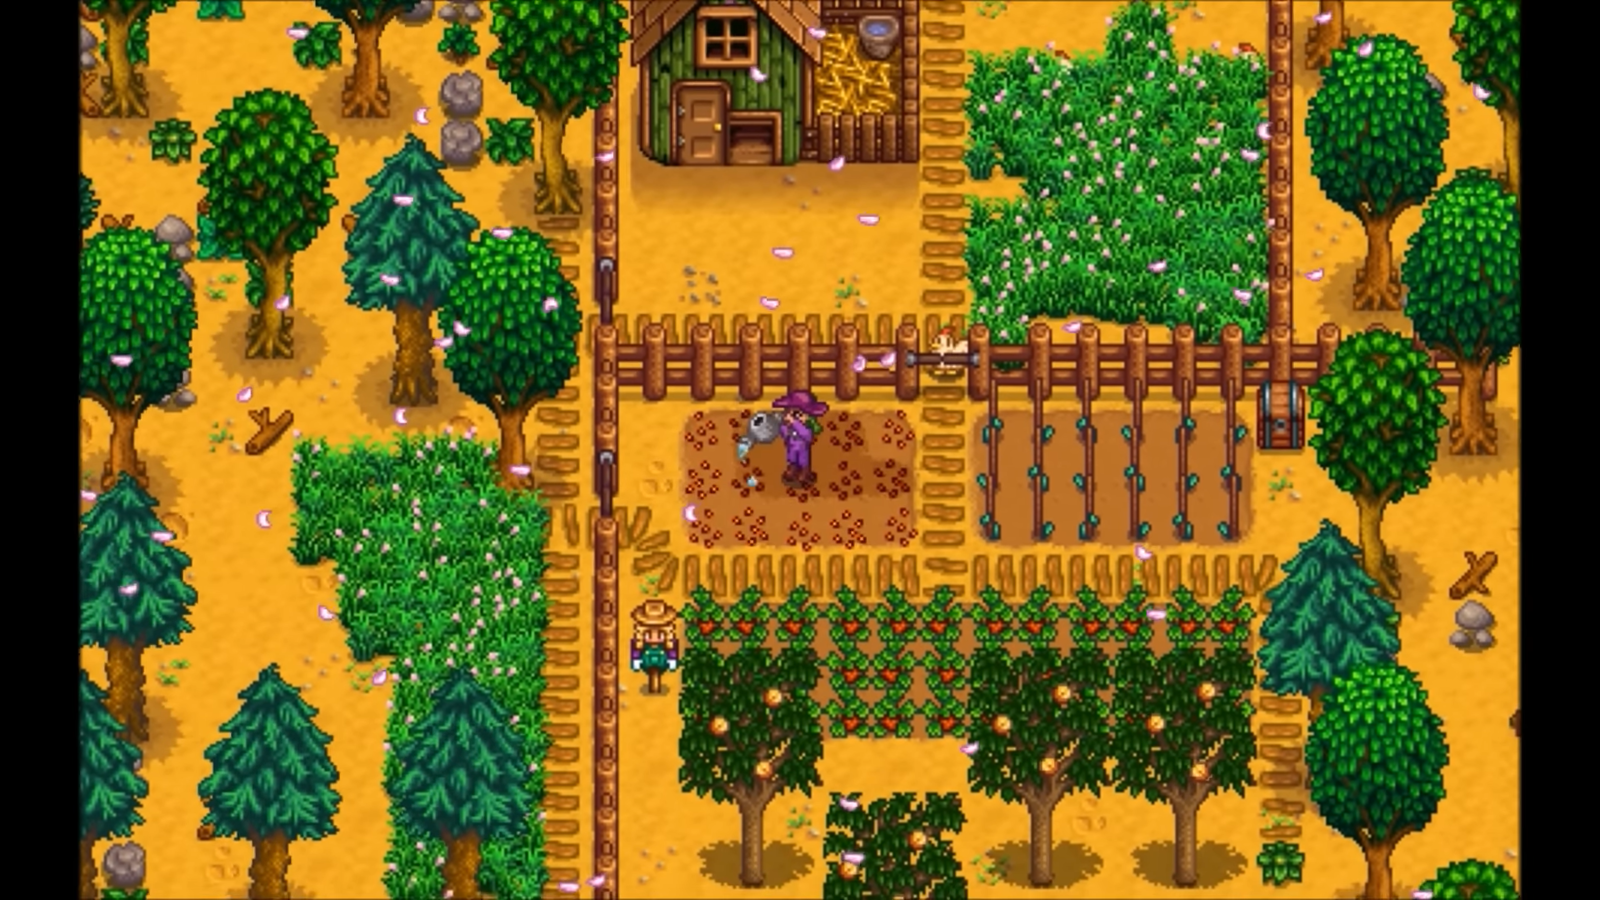 Working the farm on Stardew Valley | ConcernedApe on YouTube